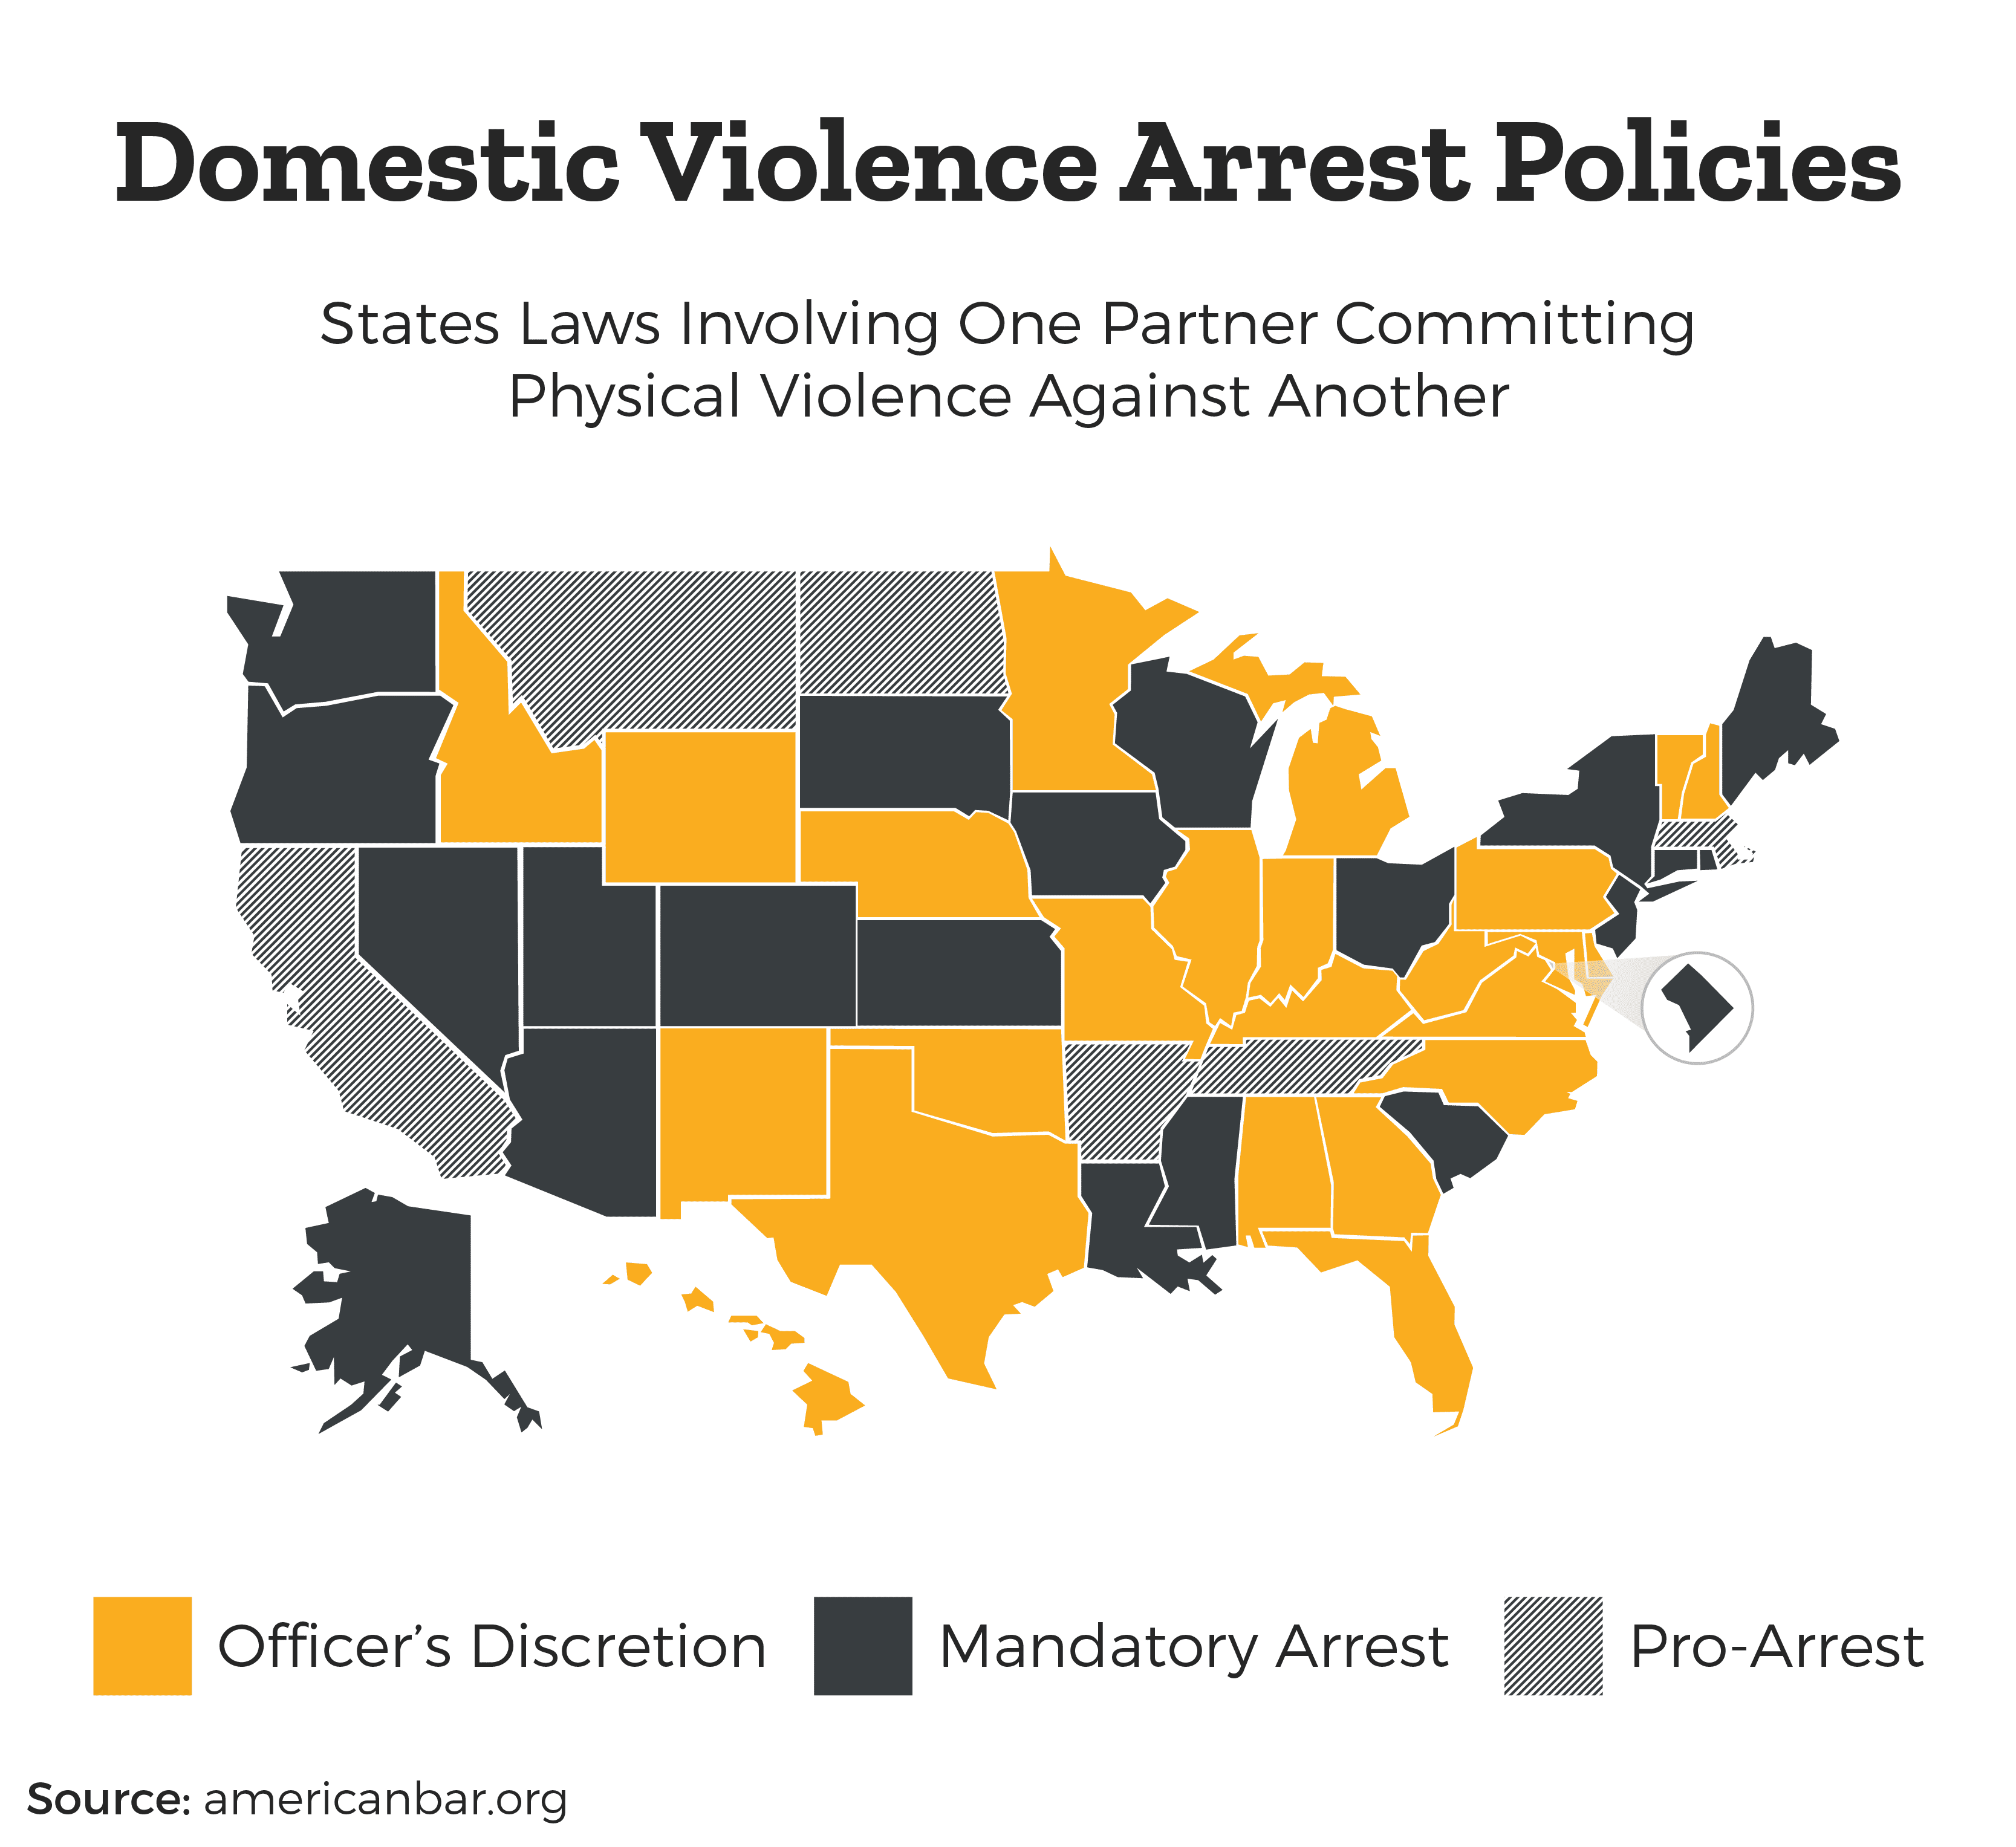 Domestic Violence Arrest Policies - a colored coded map of state laws involving one partner committing physical violence against another. There are three categories, officer's discretion, mandatory arrest, and pro-arrest.